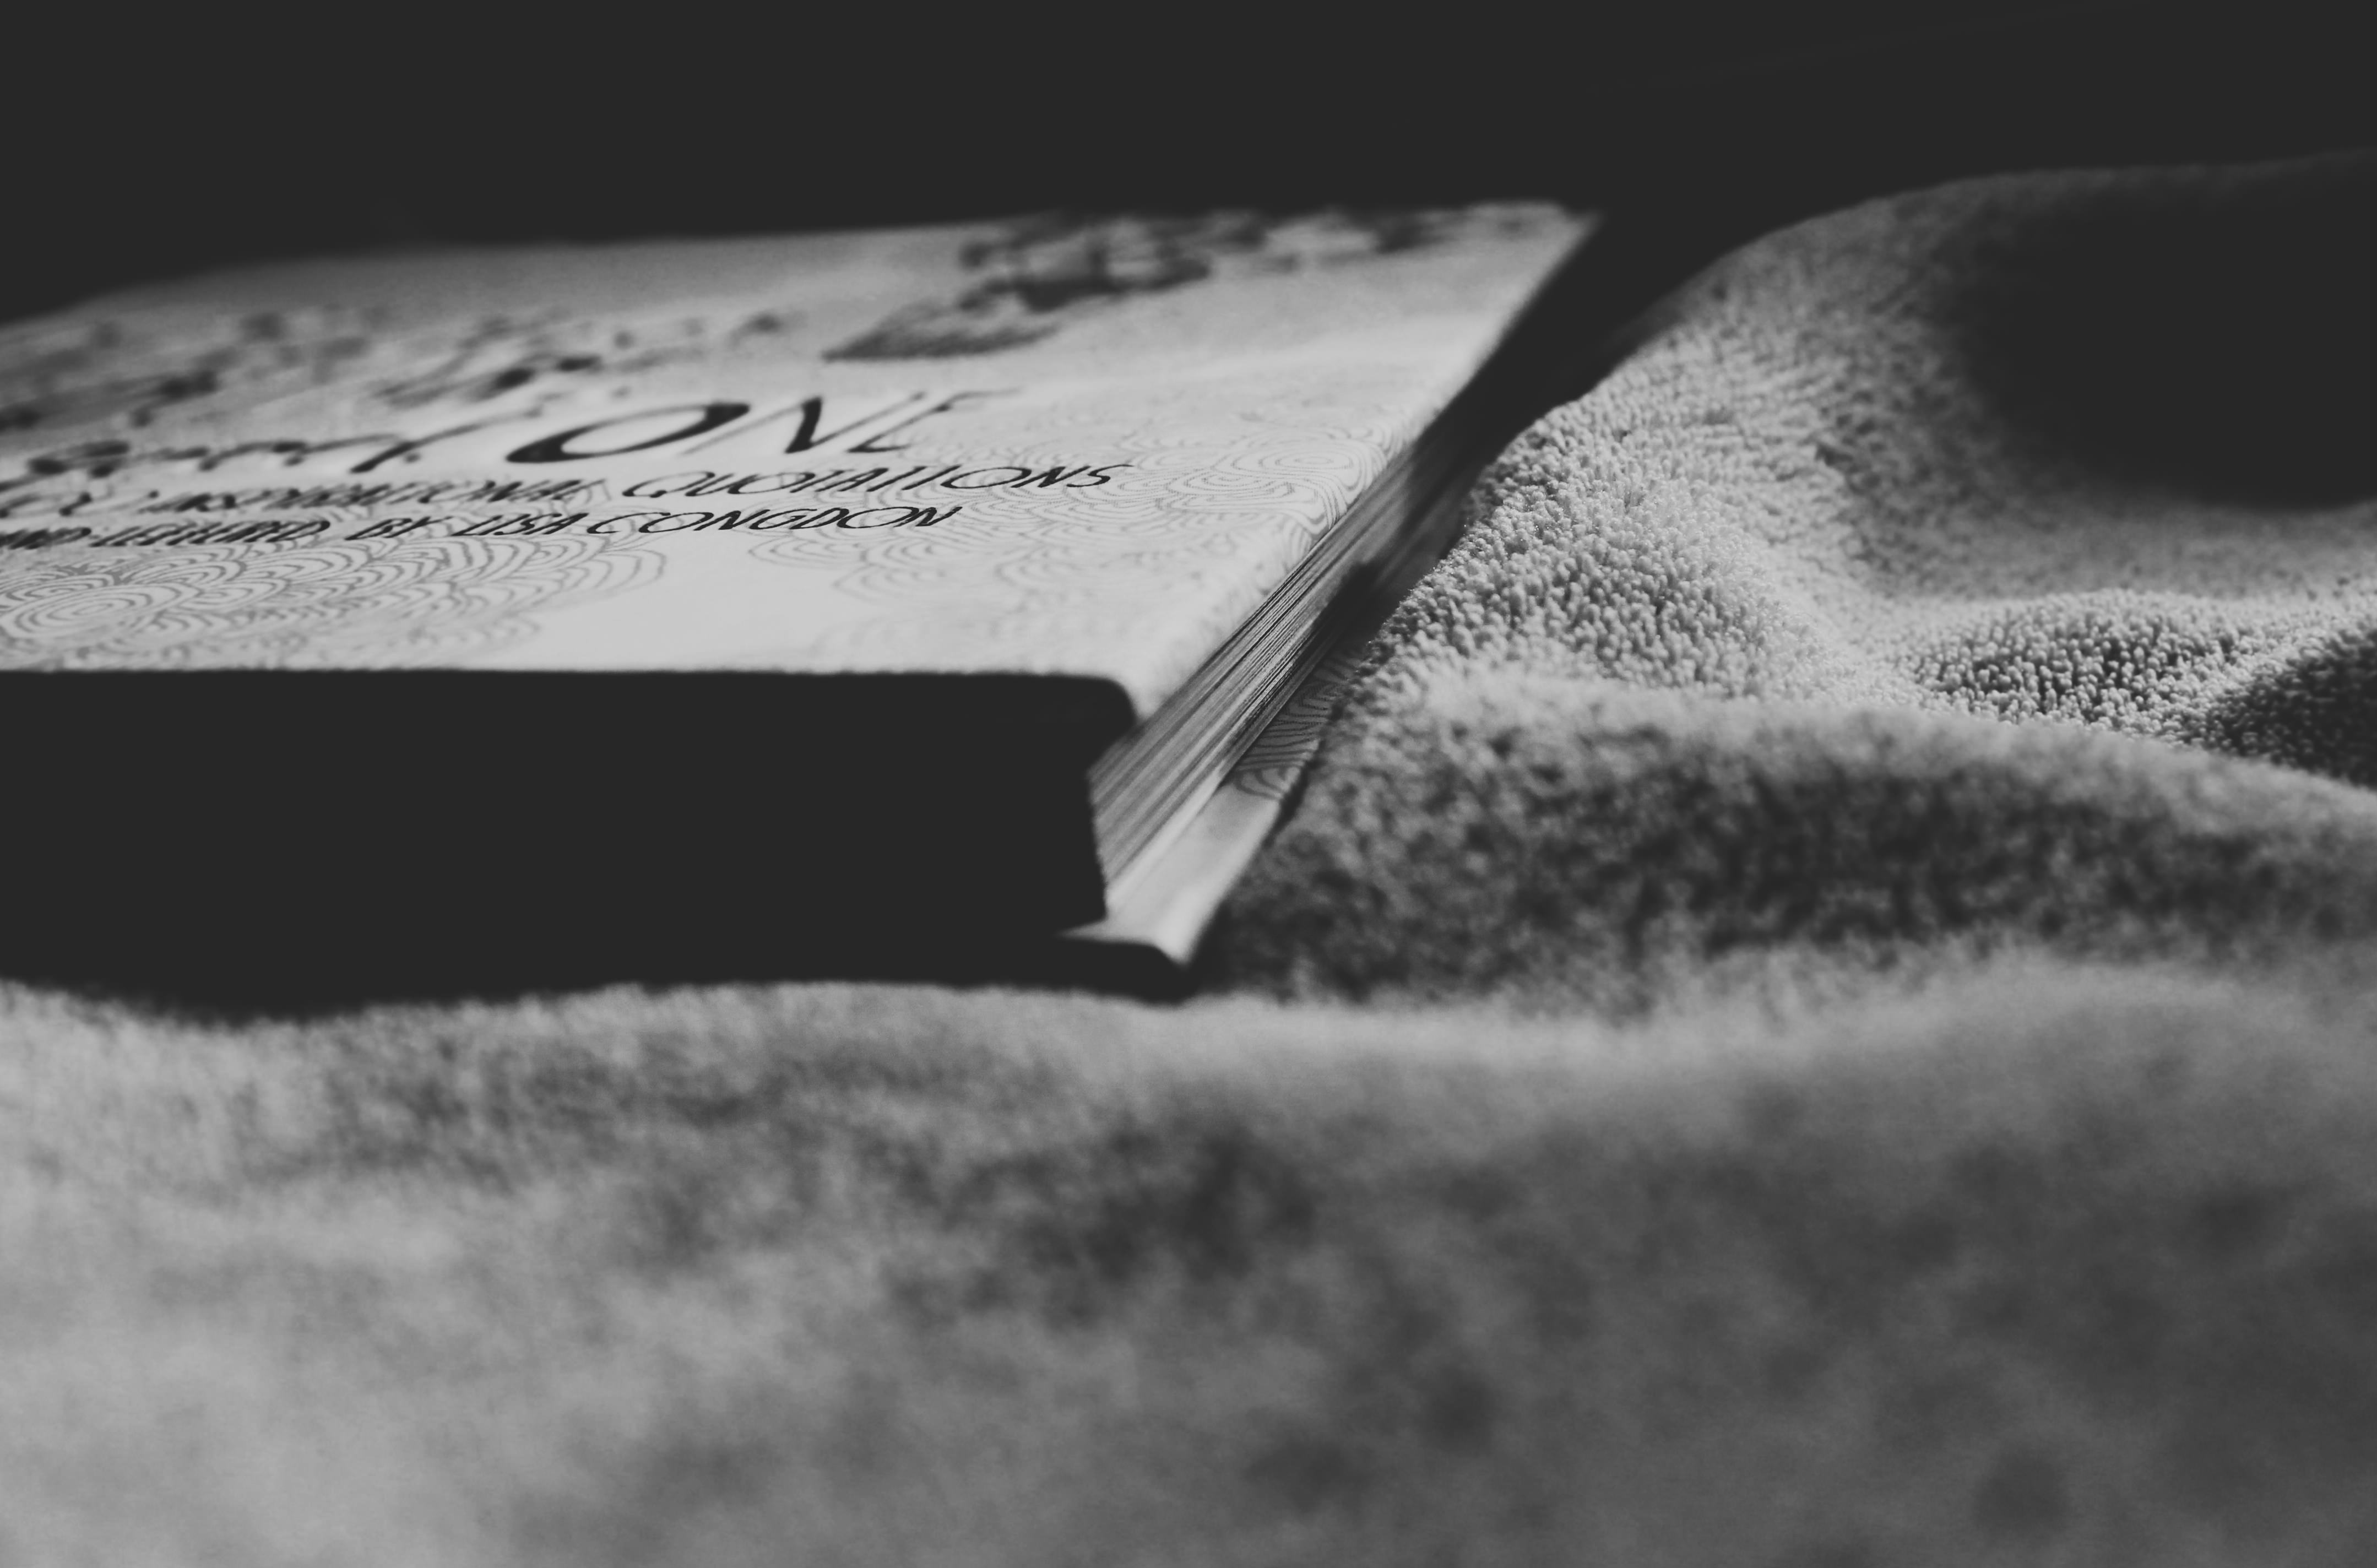 gray textile and book